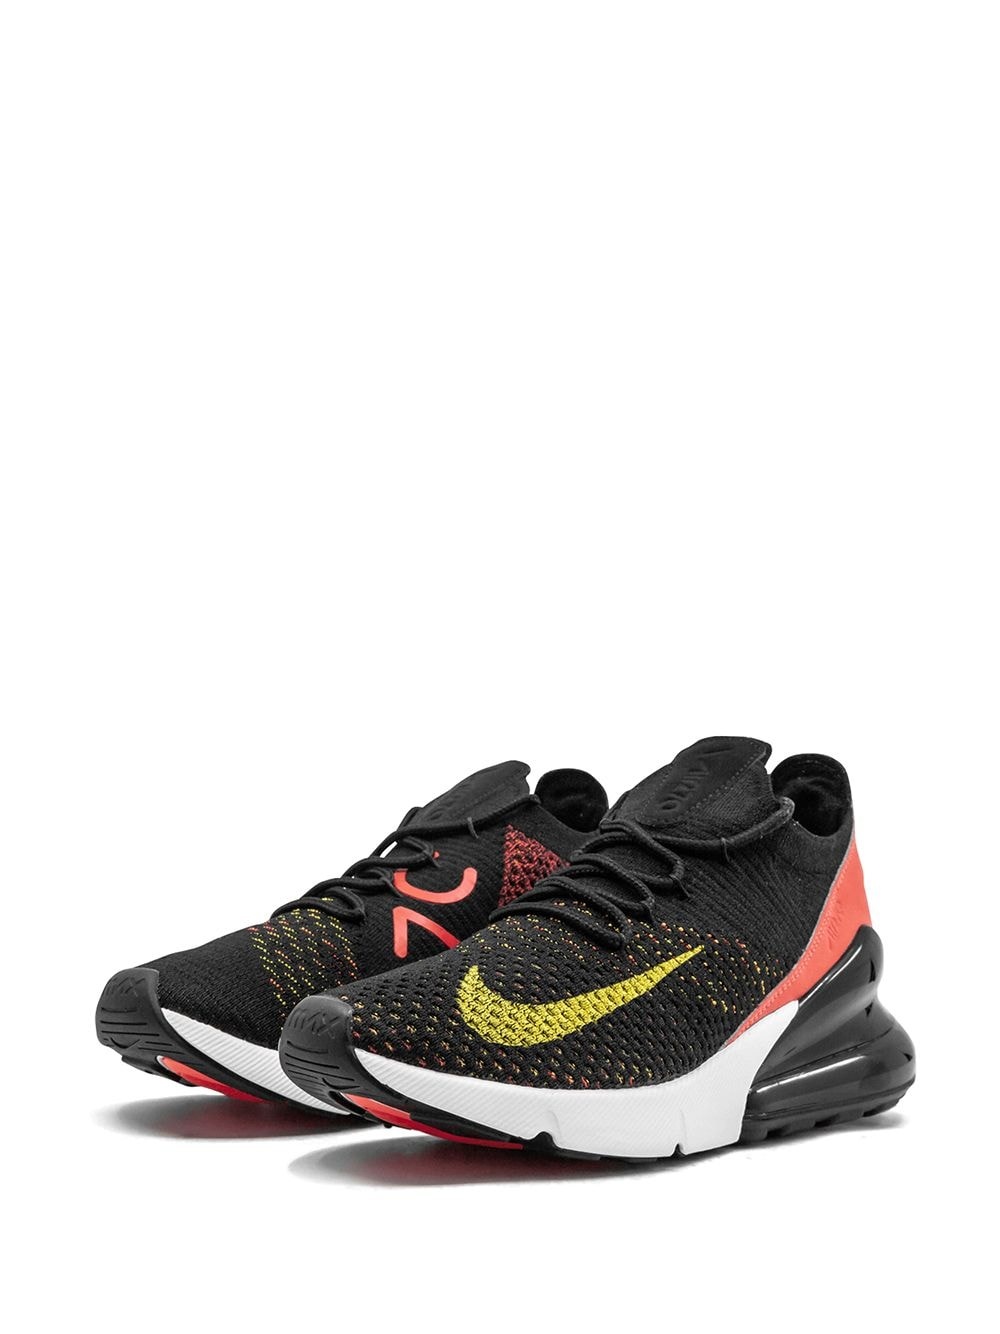 Air Max 270 Flyknit sneakers - 2